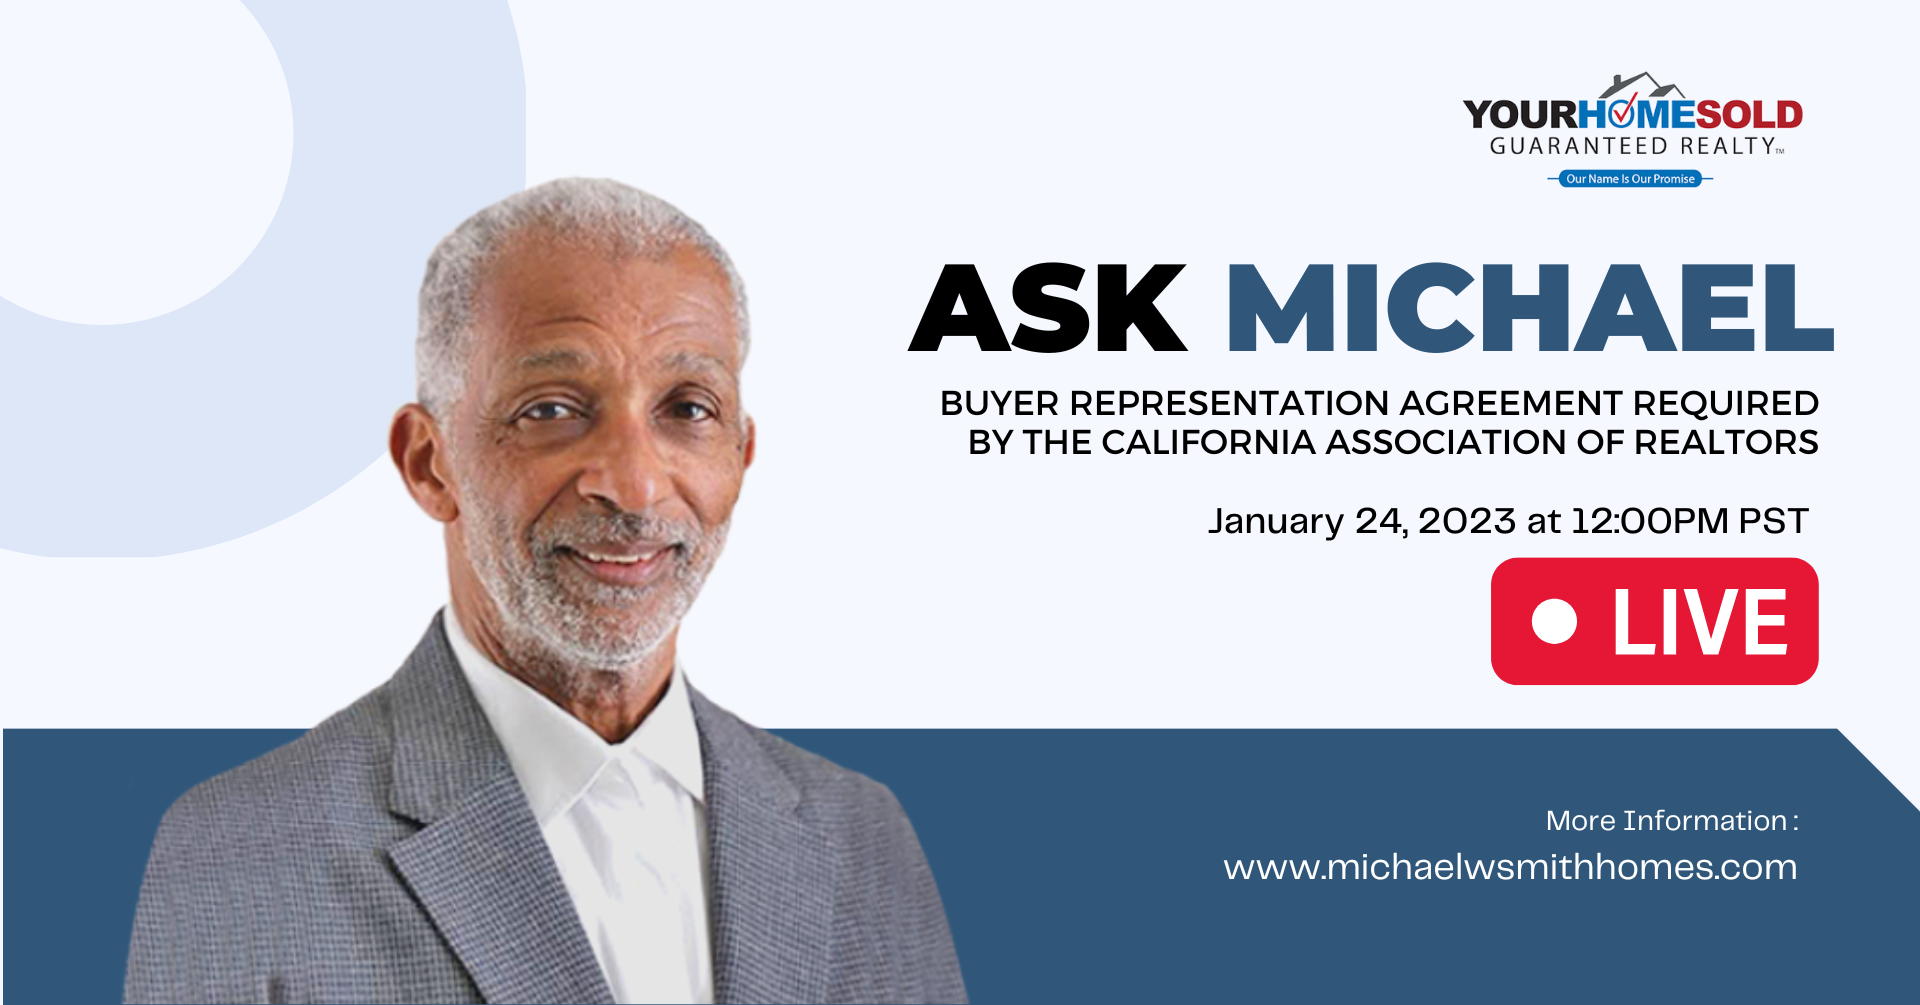 #ASKMICHAEL - EP 14: Buyer Representation Agreement Required by the California Association of Realtors